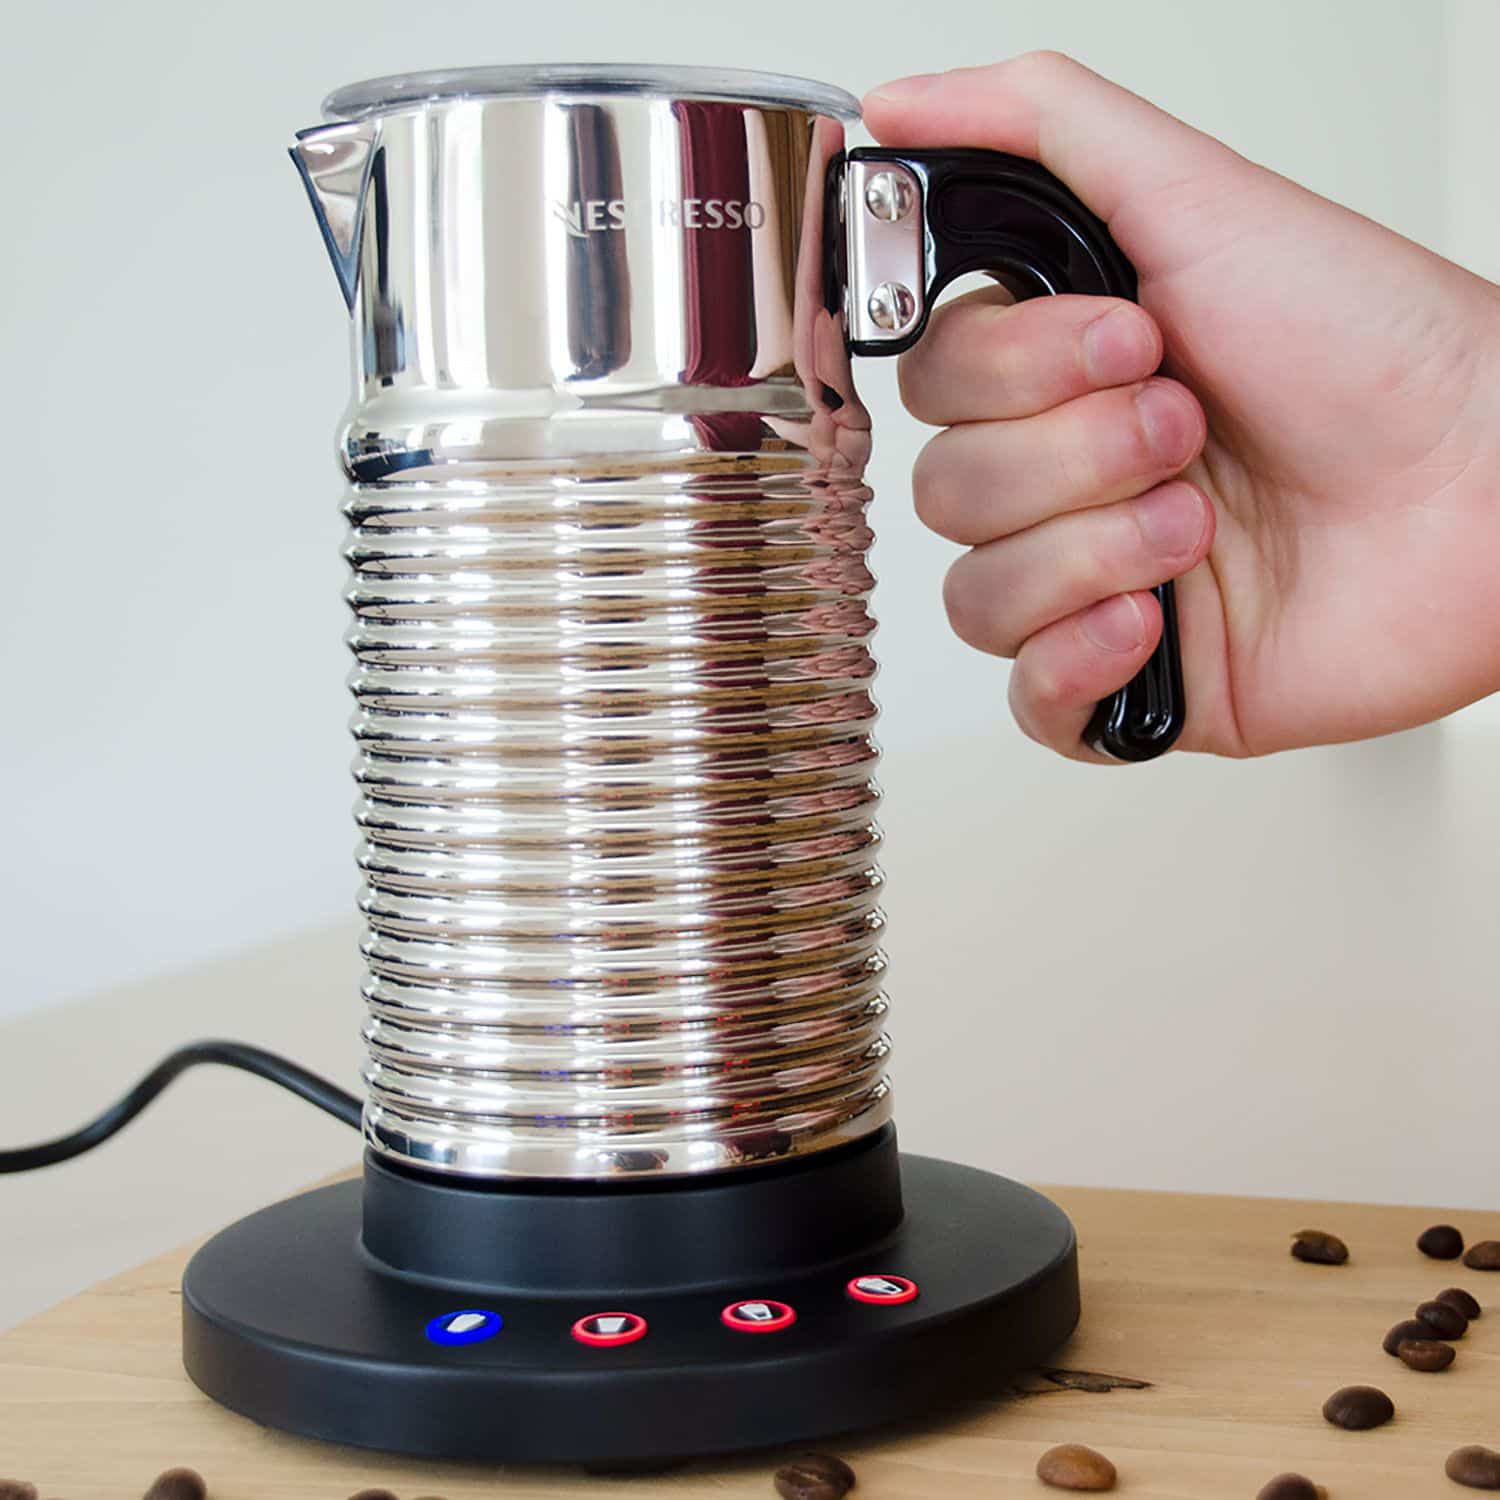 Nespresso Aeroccino4 Milk Frother Review: High Quality at a High Price